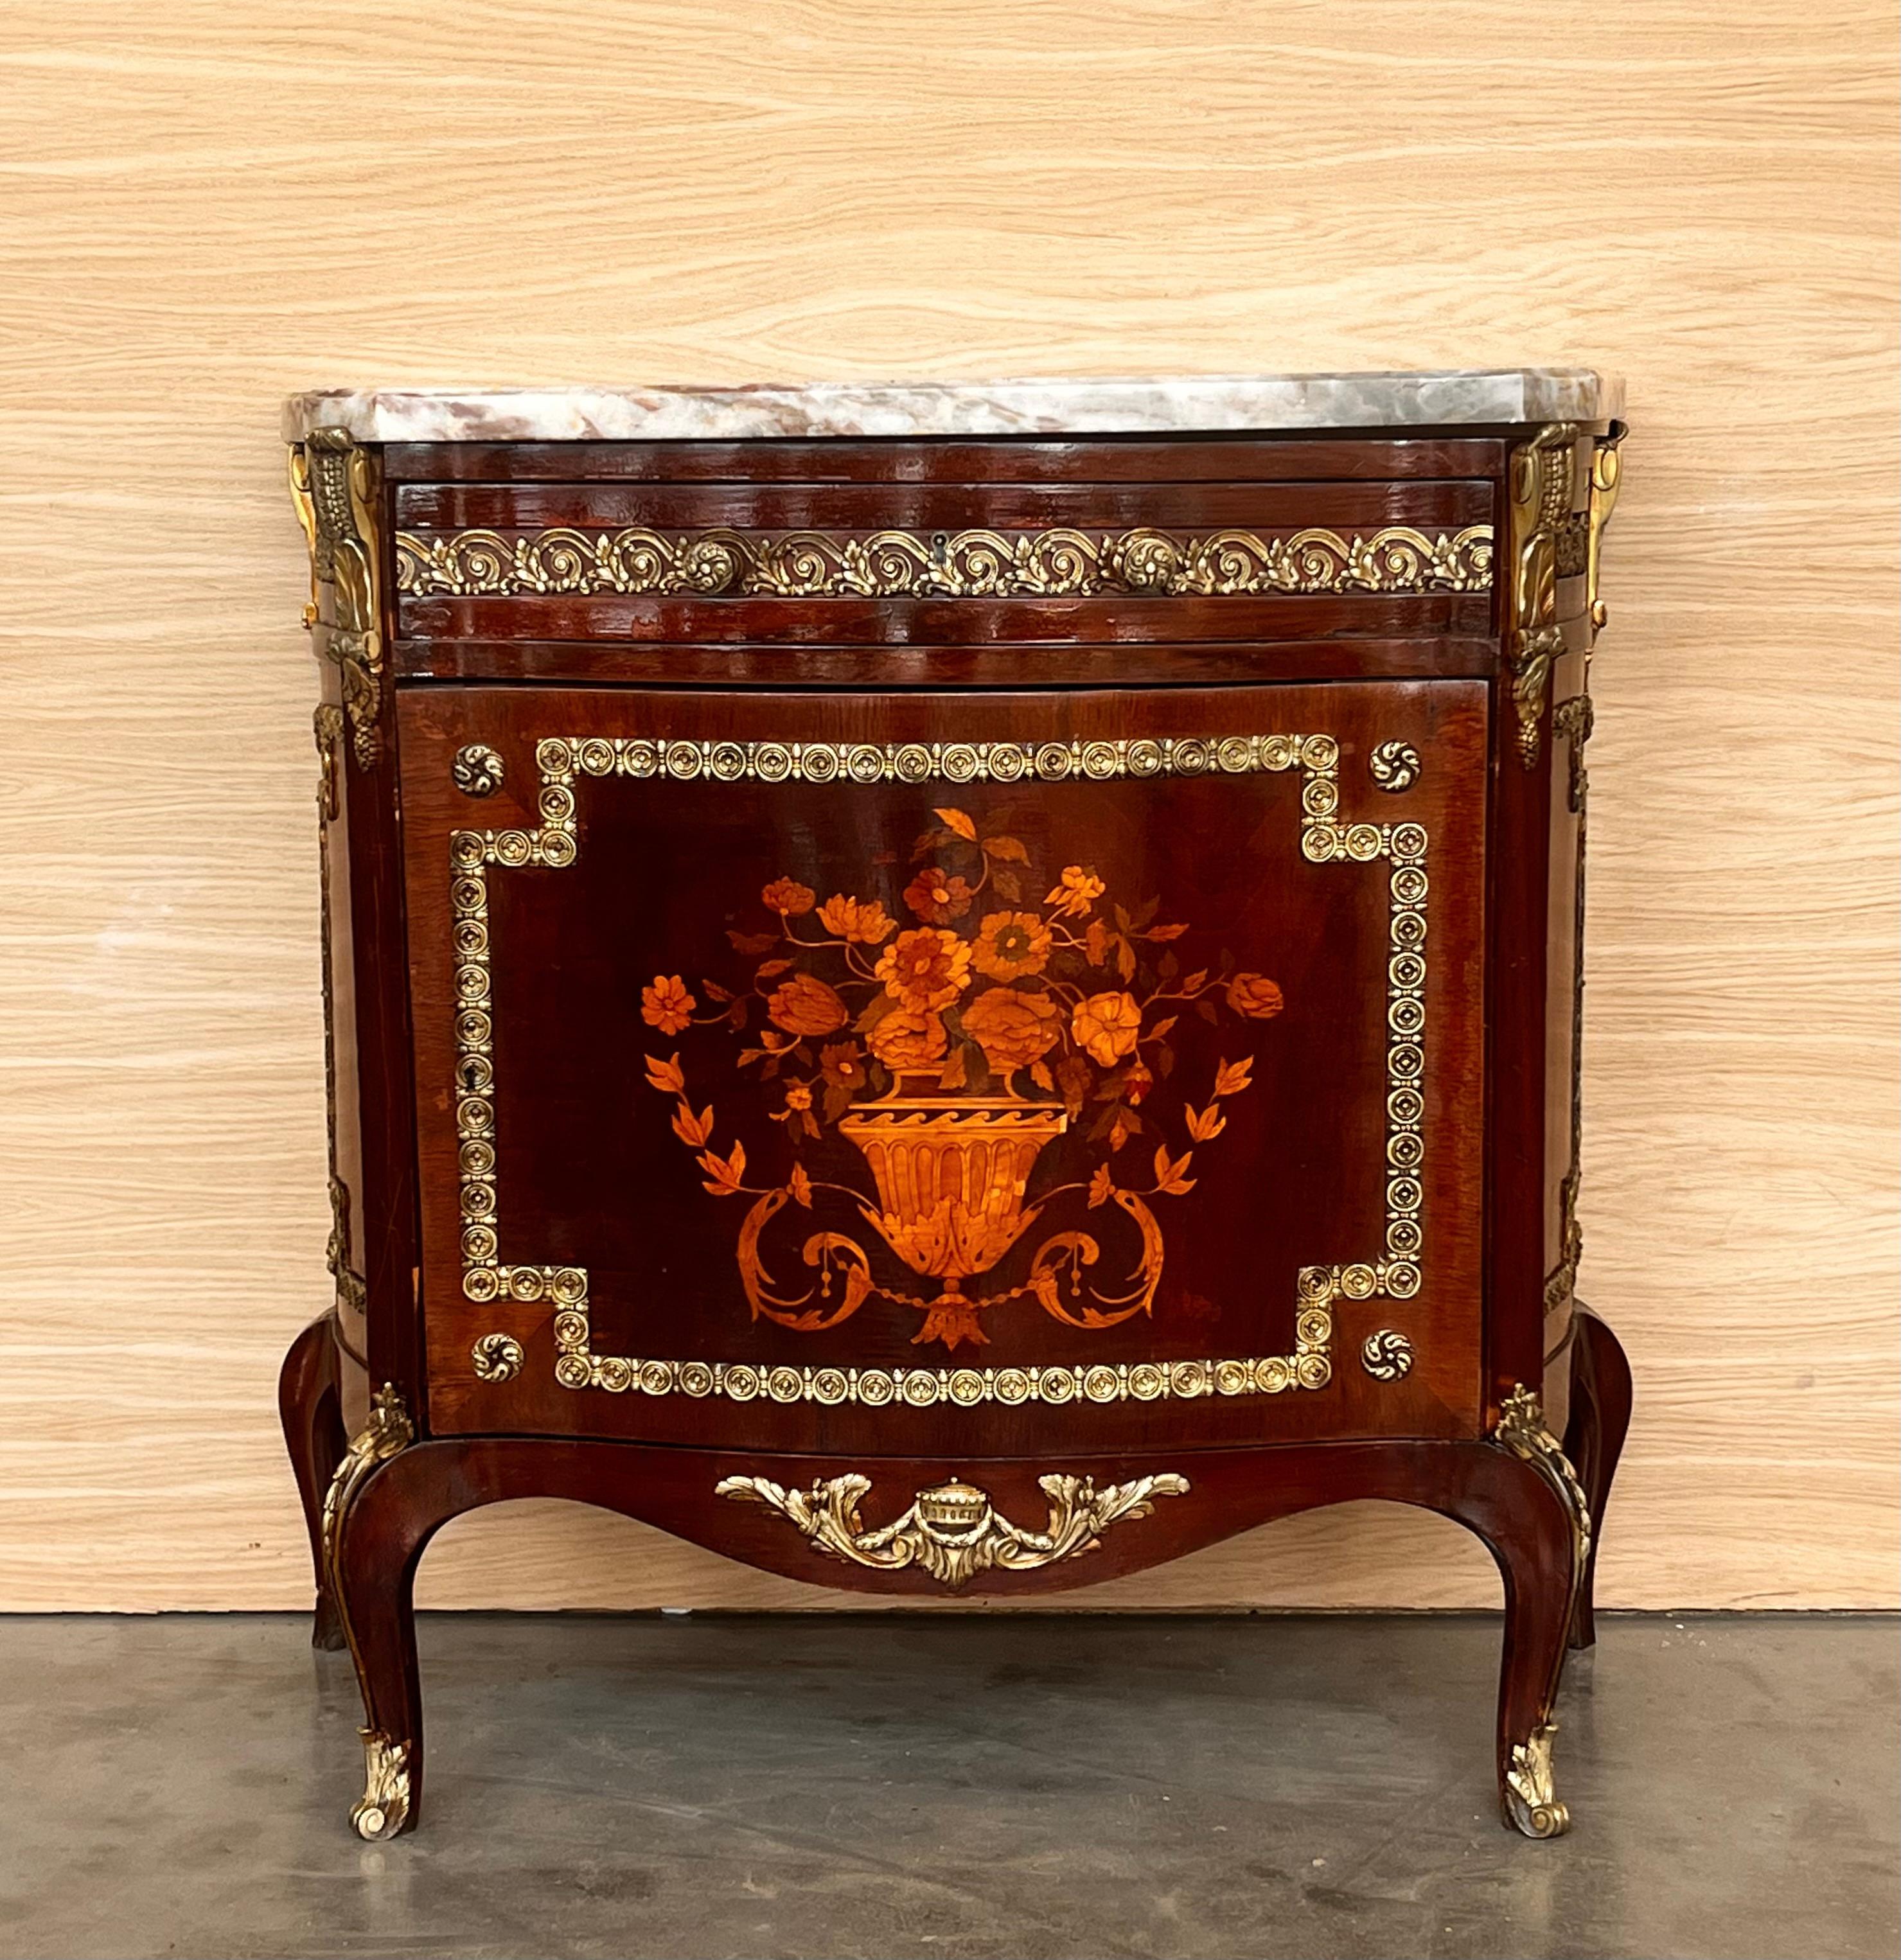 This stunning and extremely rare 19th century Louis XV-style buffet opens at the front with a single door and drawer. Adorned with intricate floral marquetry, the door displays a bouquet in a vase set within a frame highlighted by a border in